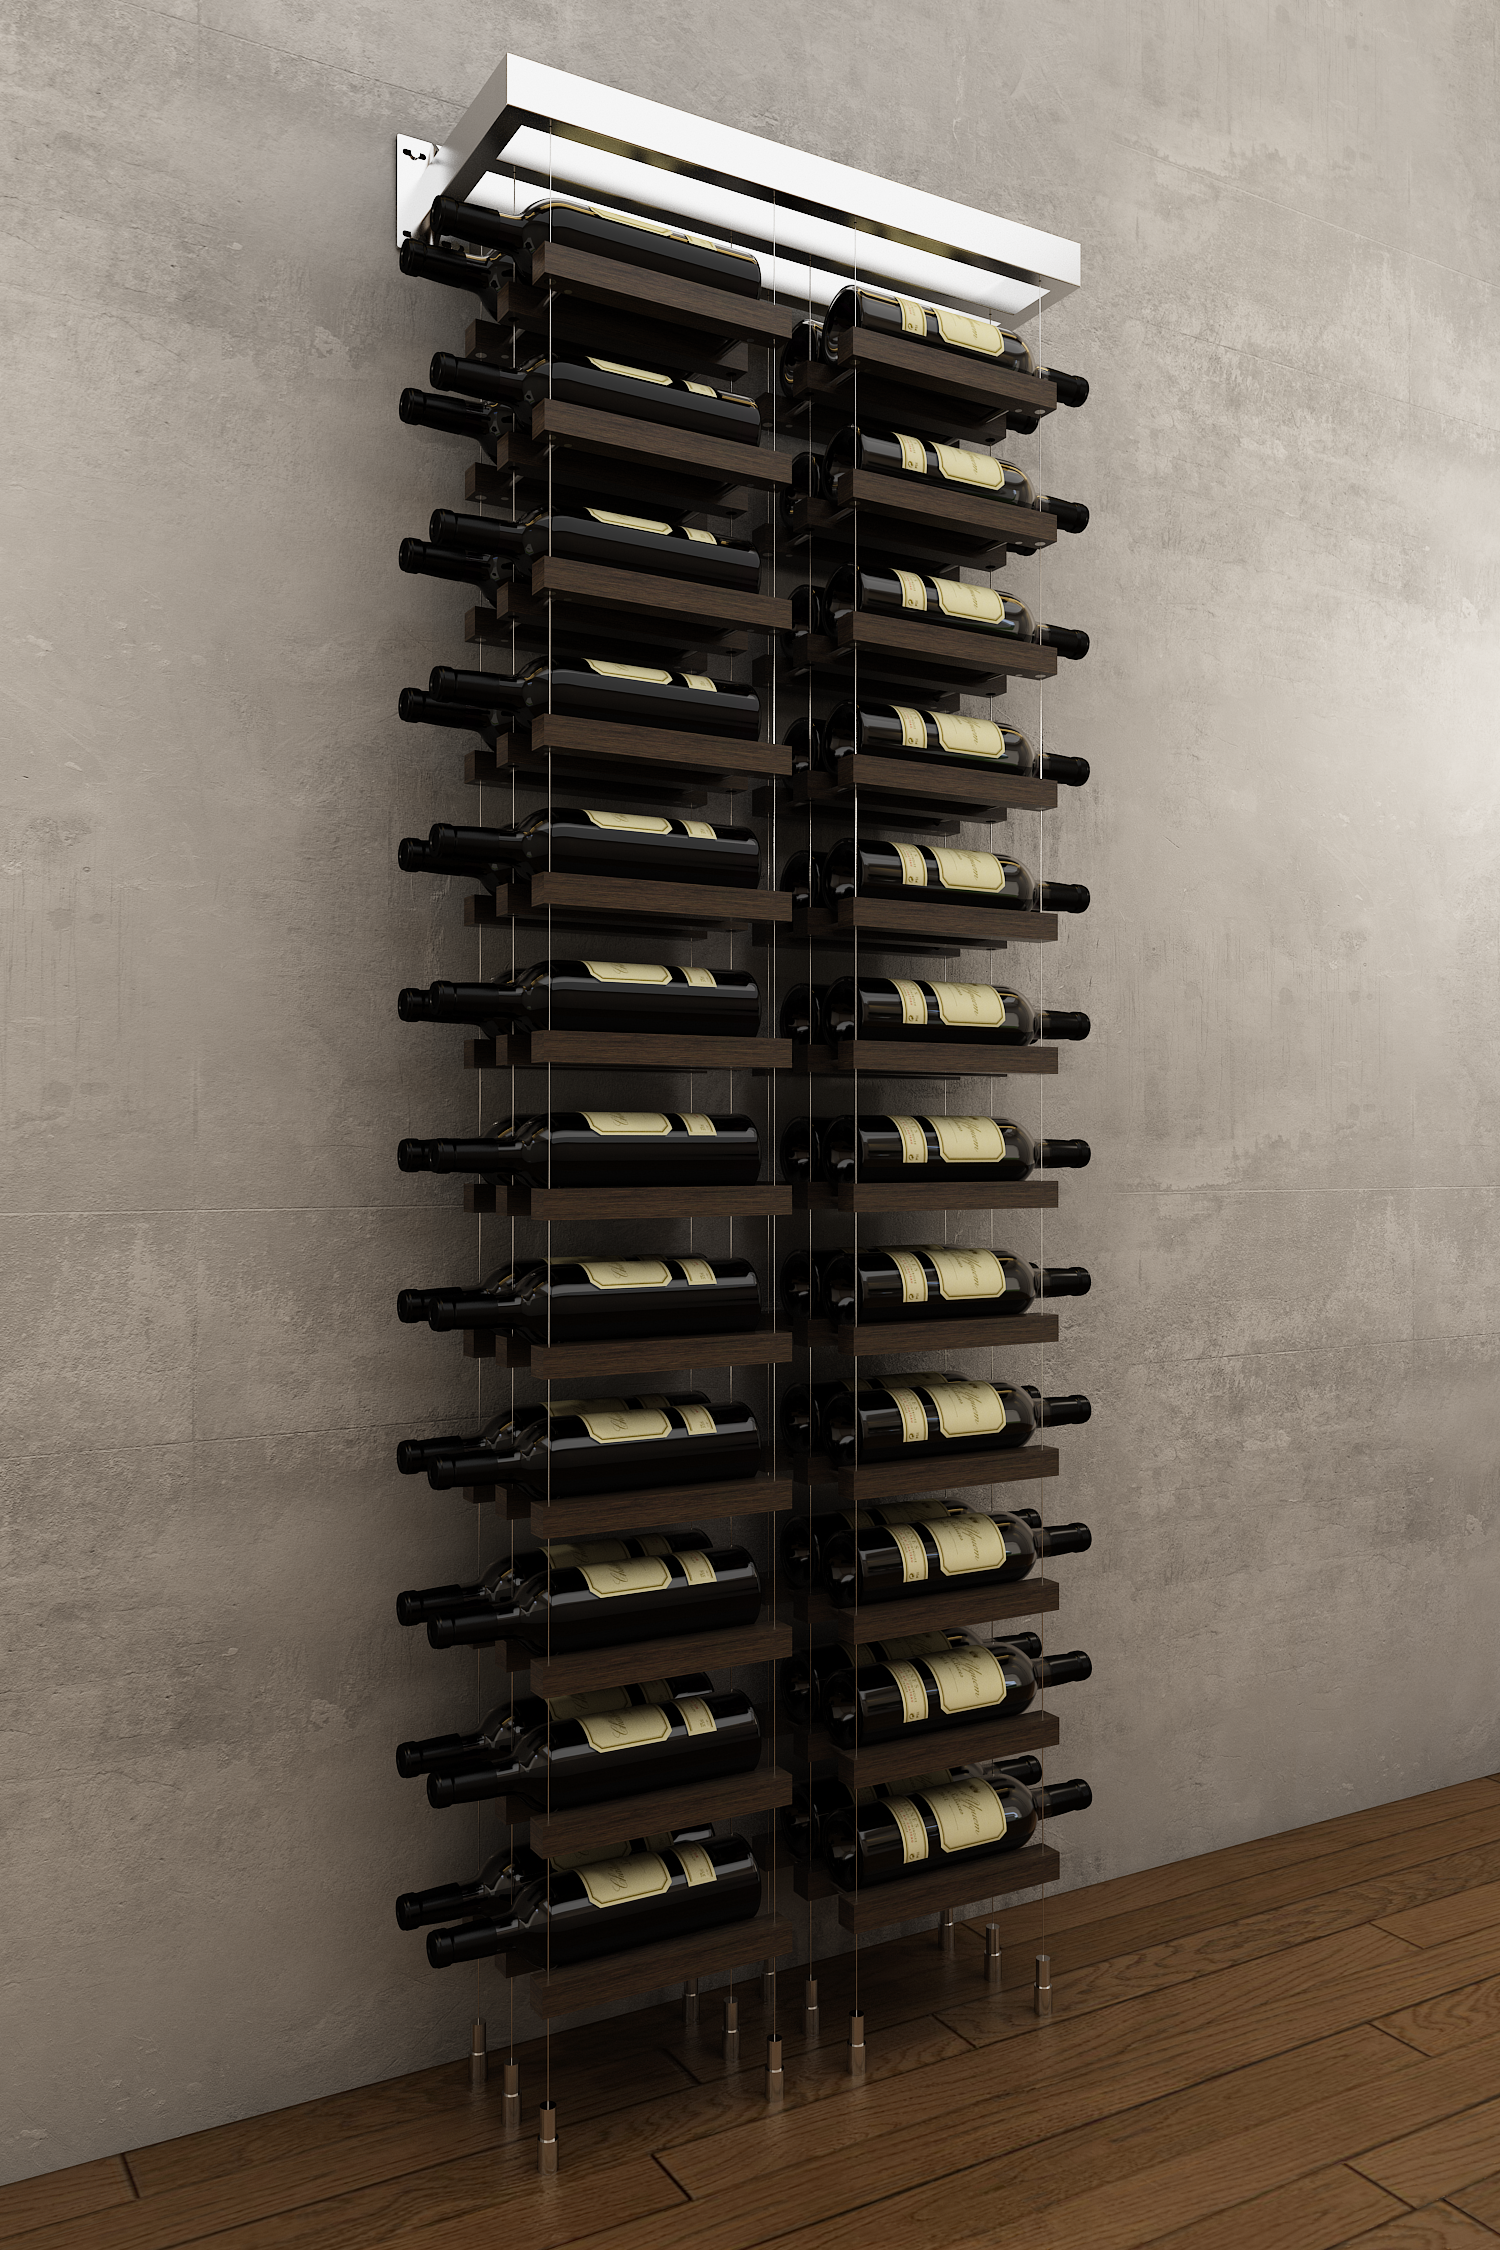 48 bottles double column two bottle deep wall mounted BUOYANT® cable wine rack (chrome hardware)